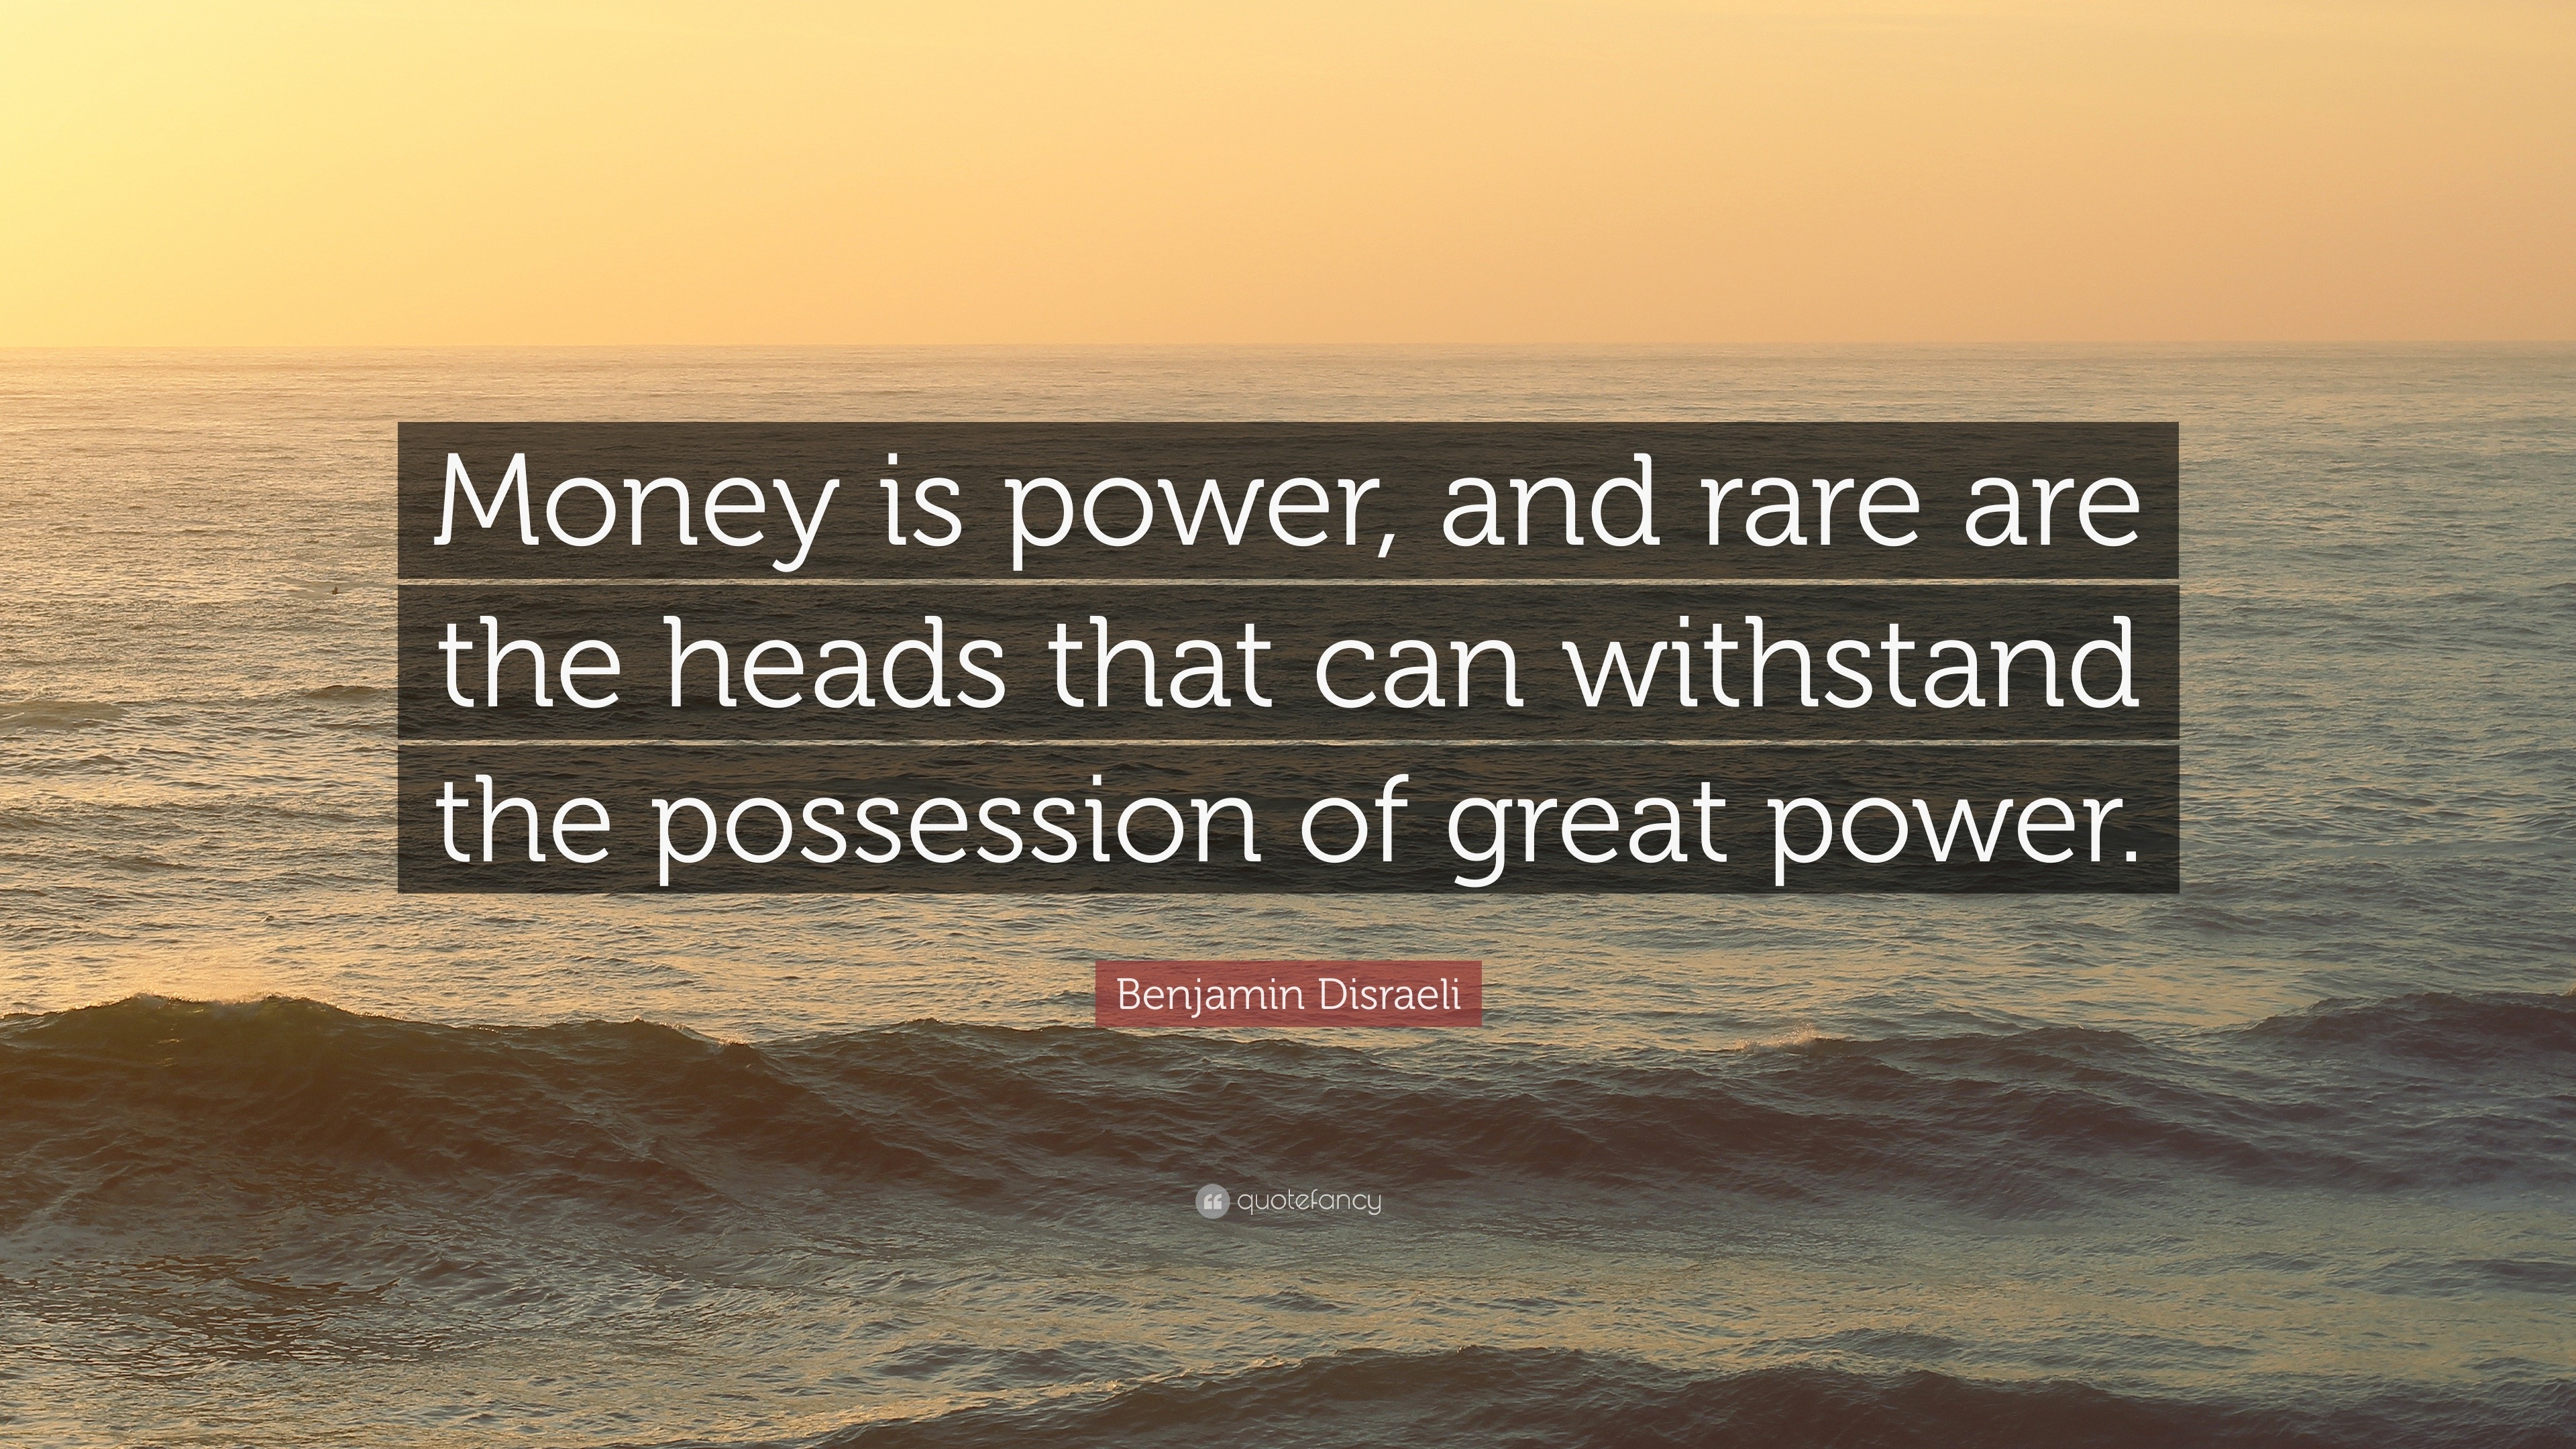 Benjamin Disraeli Quote “Money is power, and rare are the heads that